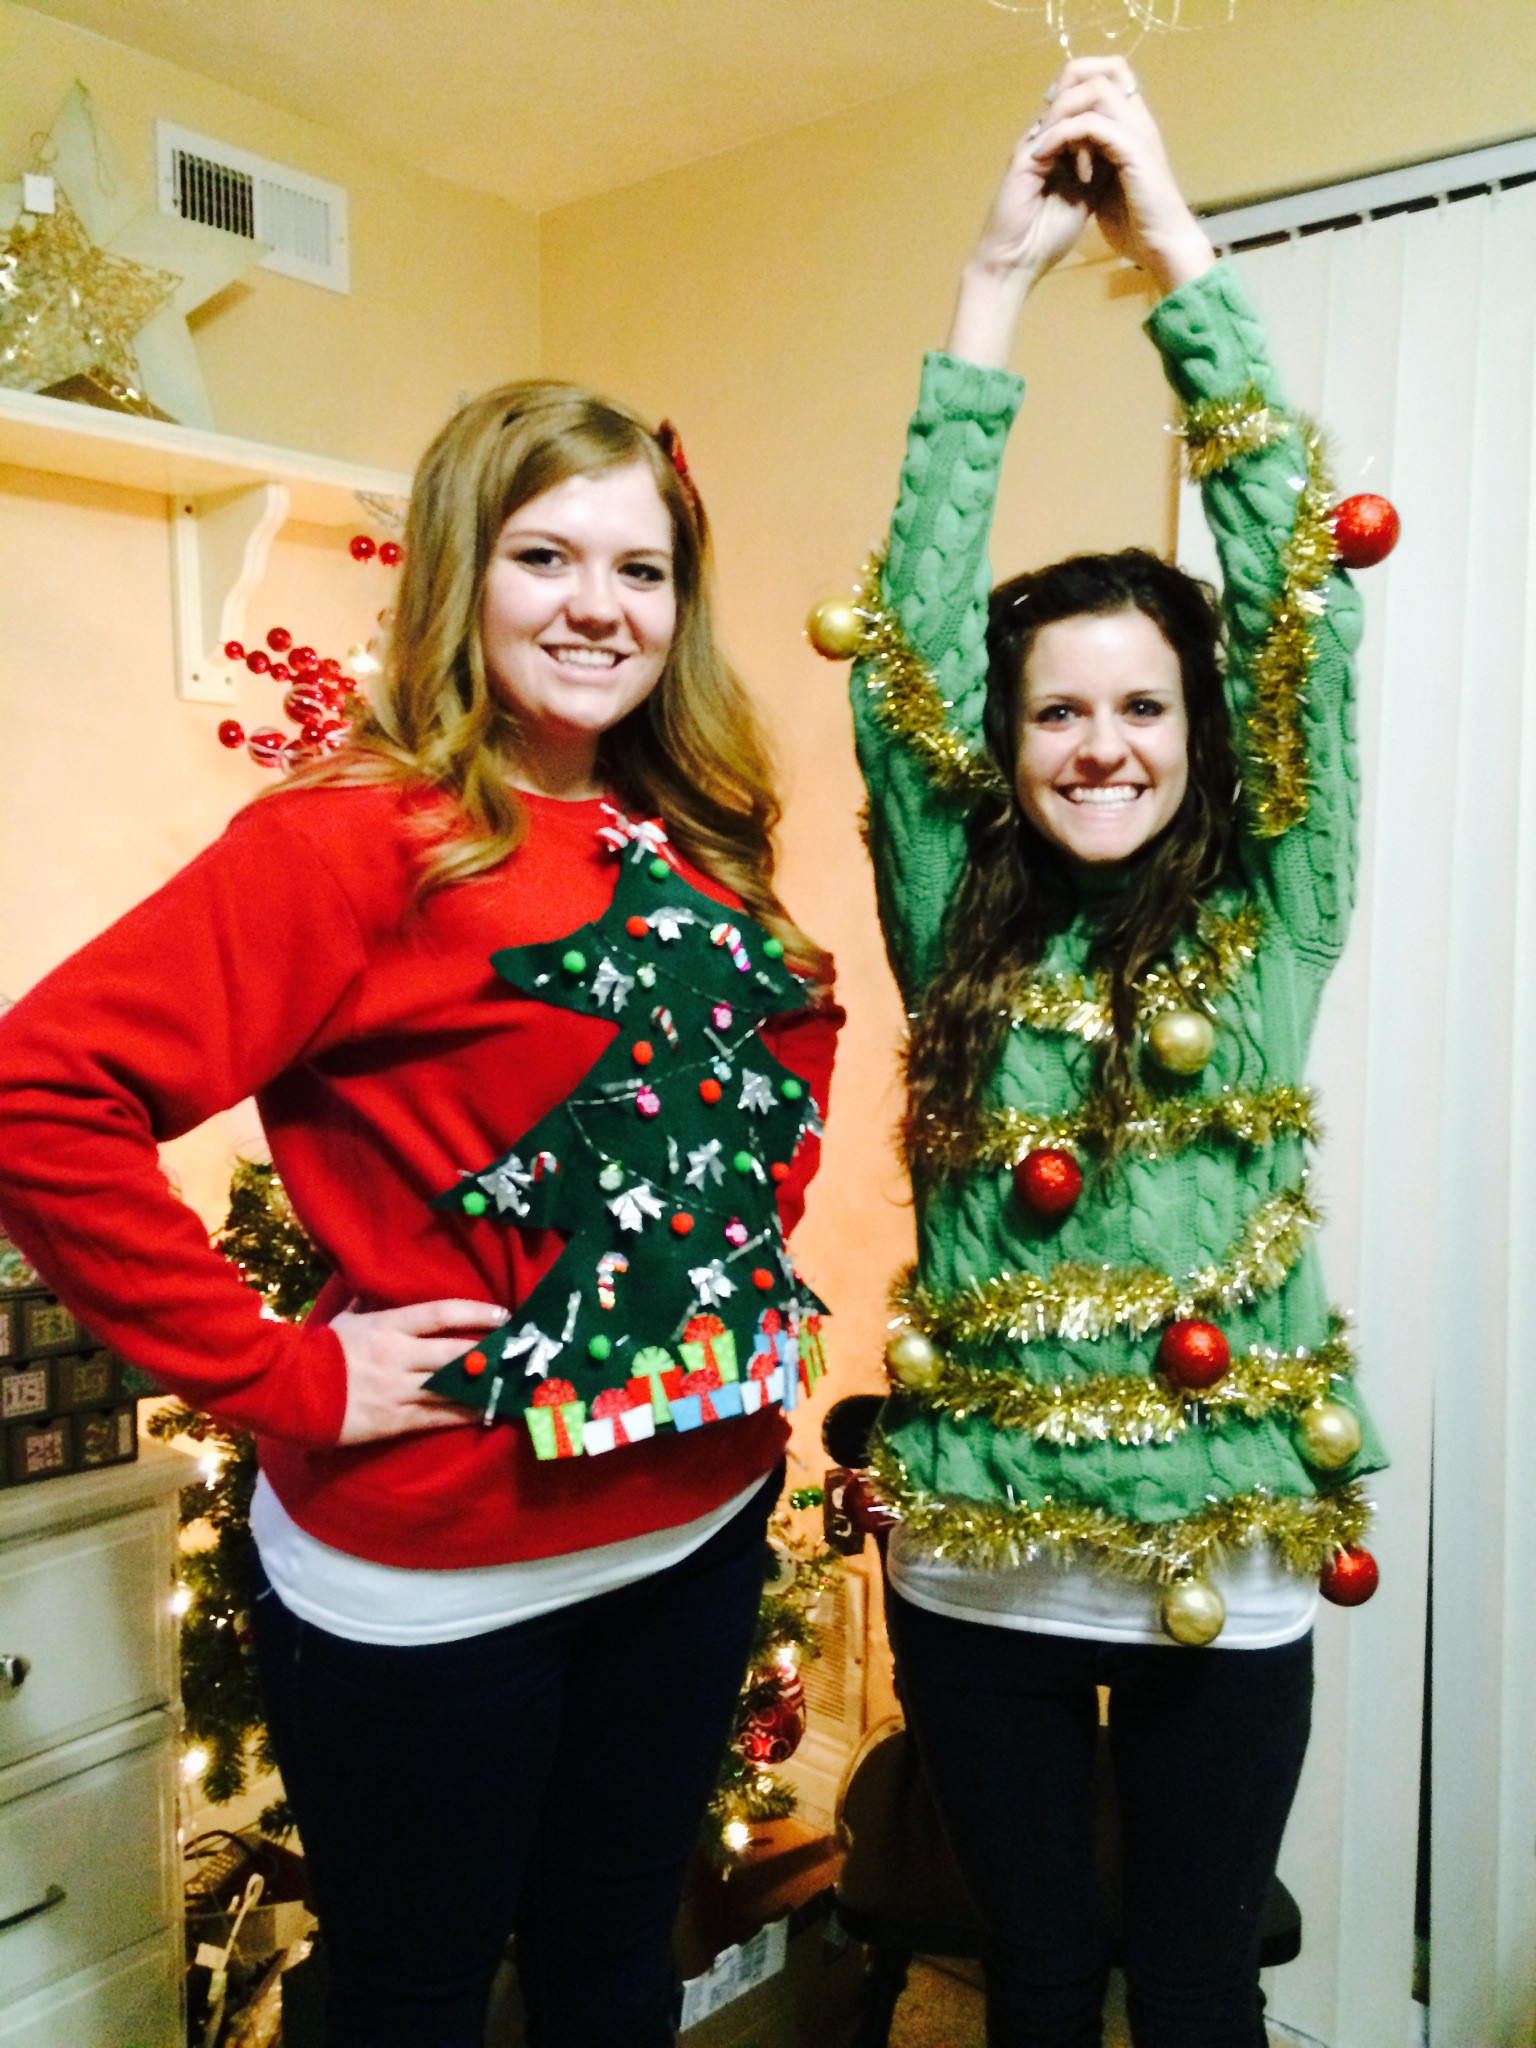 Ugly Christmas Sweater DIY
 DIY Ugly Sweater Ideas